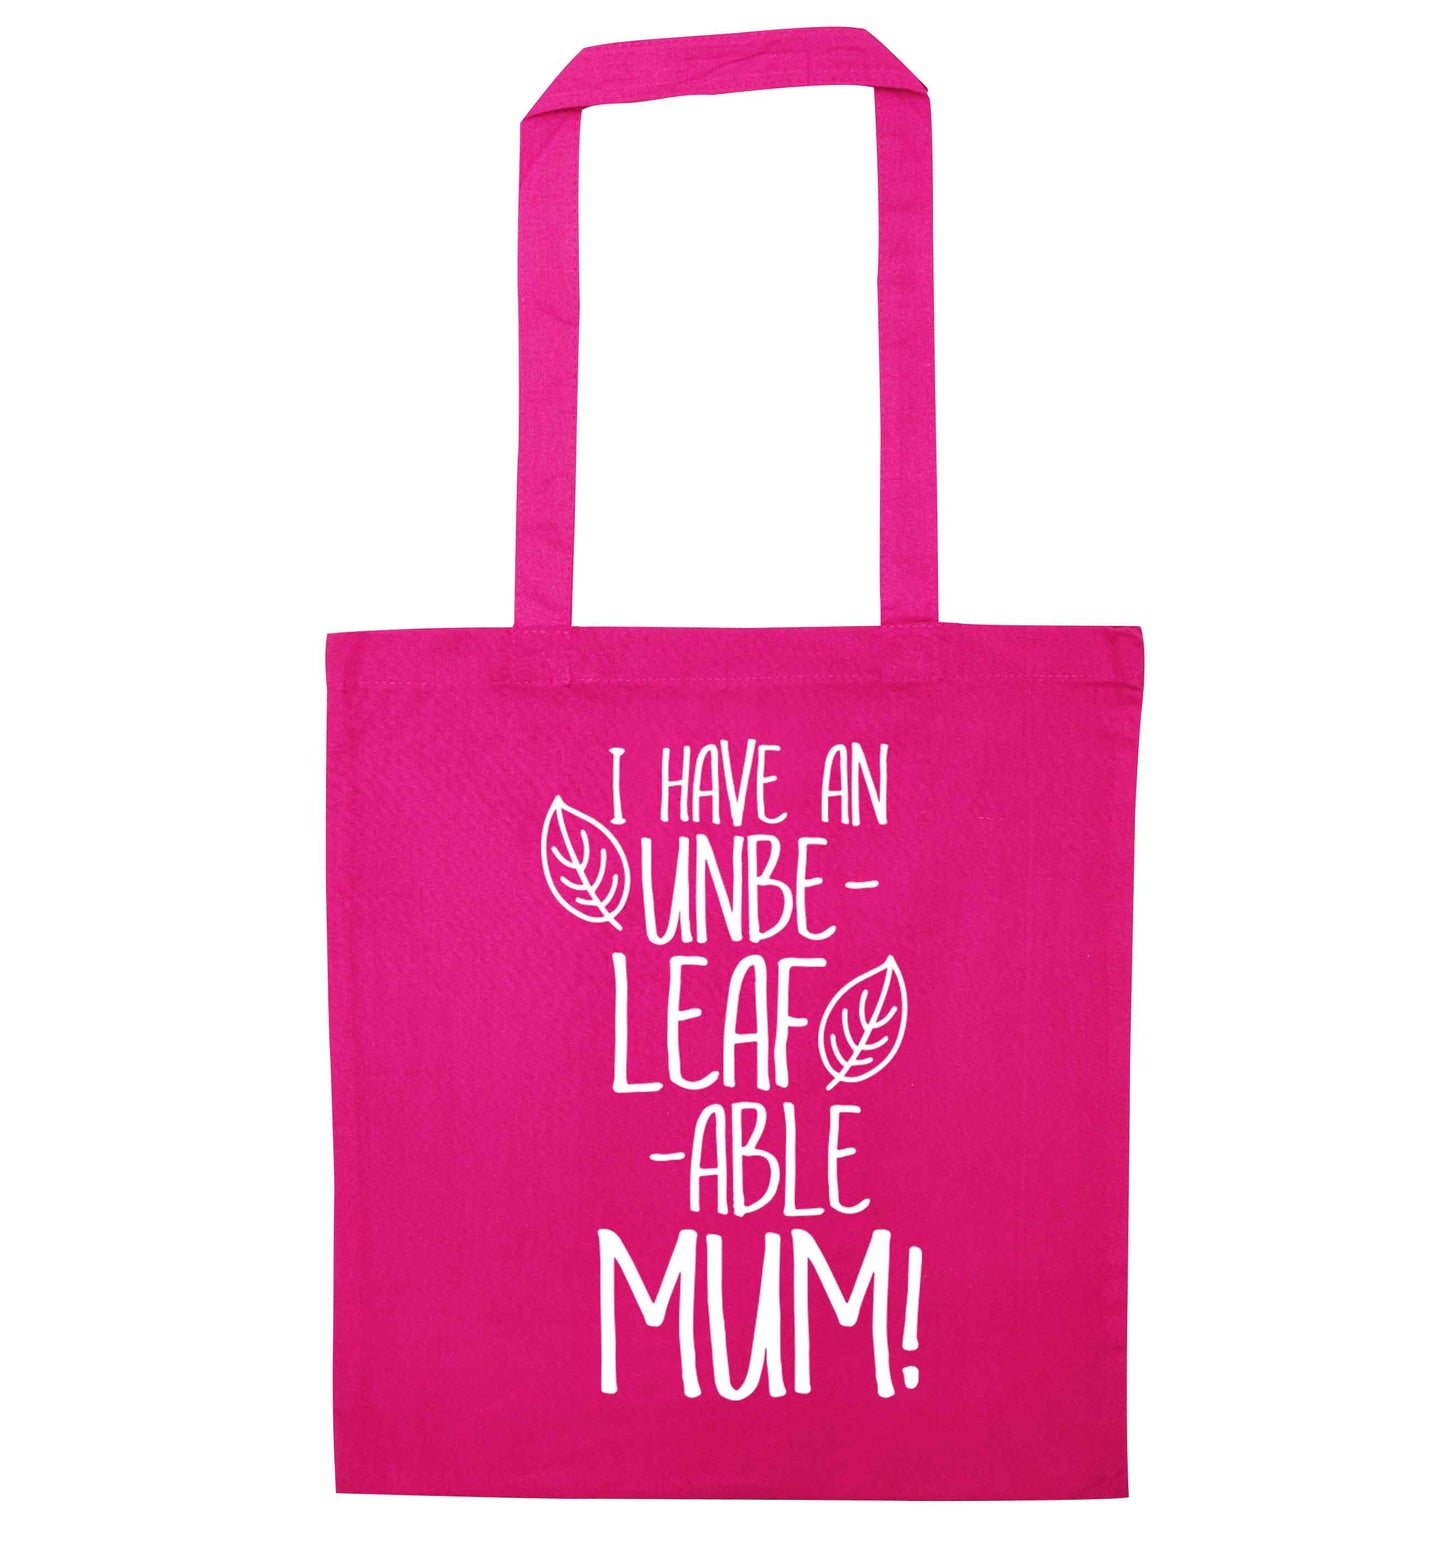 I have an unbeleafable mum! pink tote bag